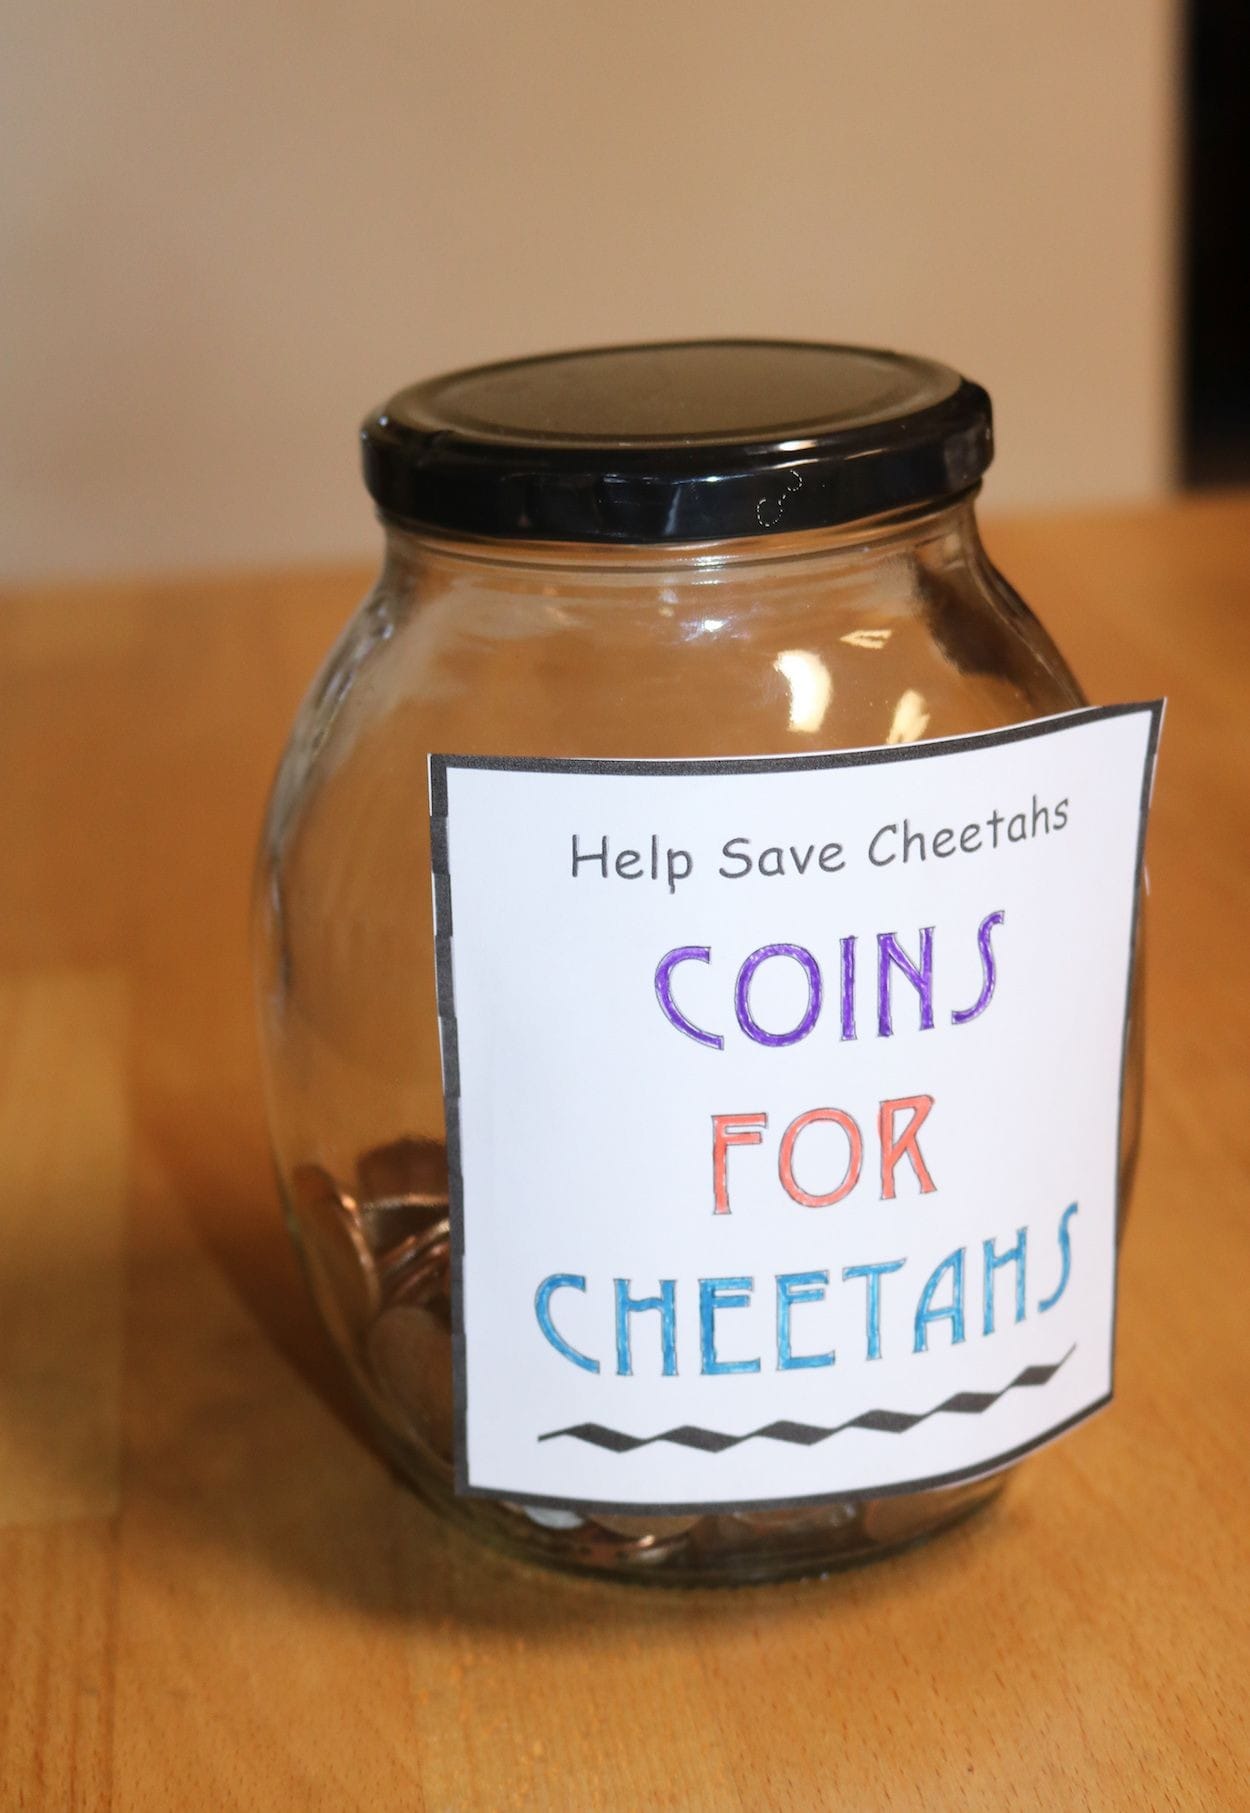 Collect coins to help save cheetahs. Use this cute label on your own jar and start collecting today.